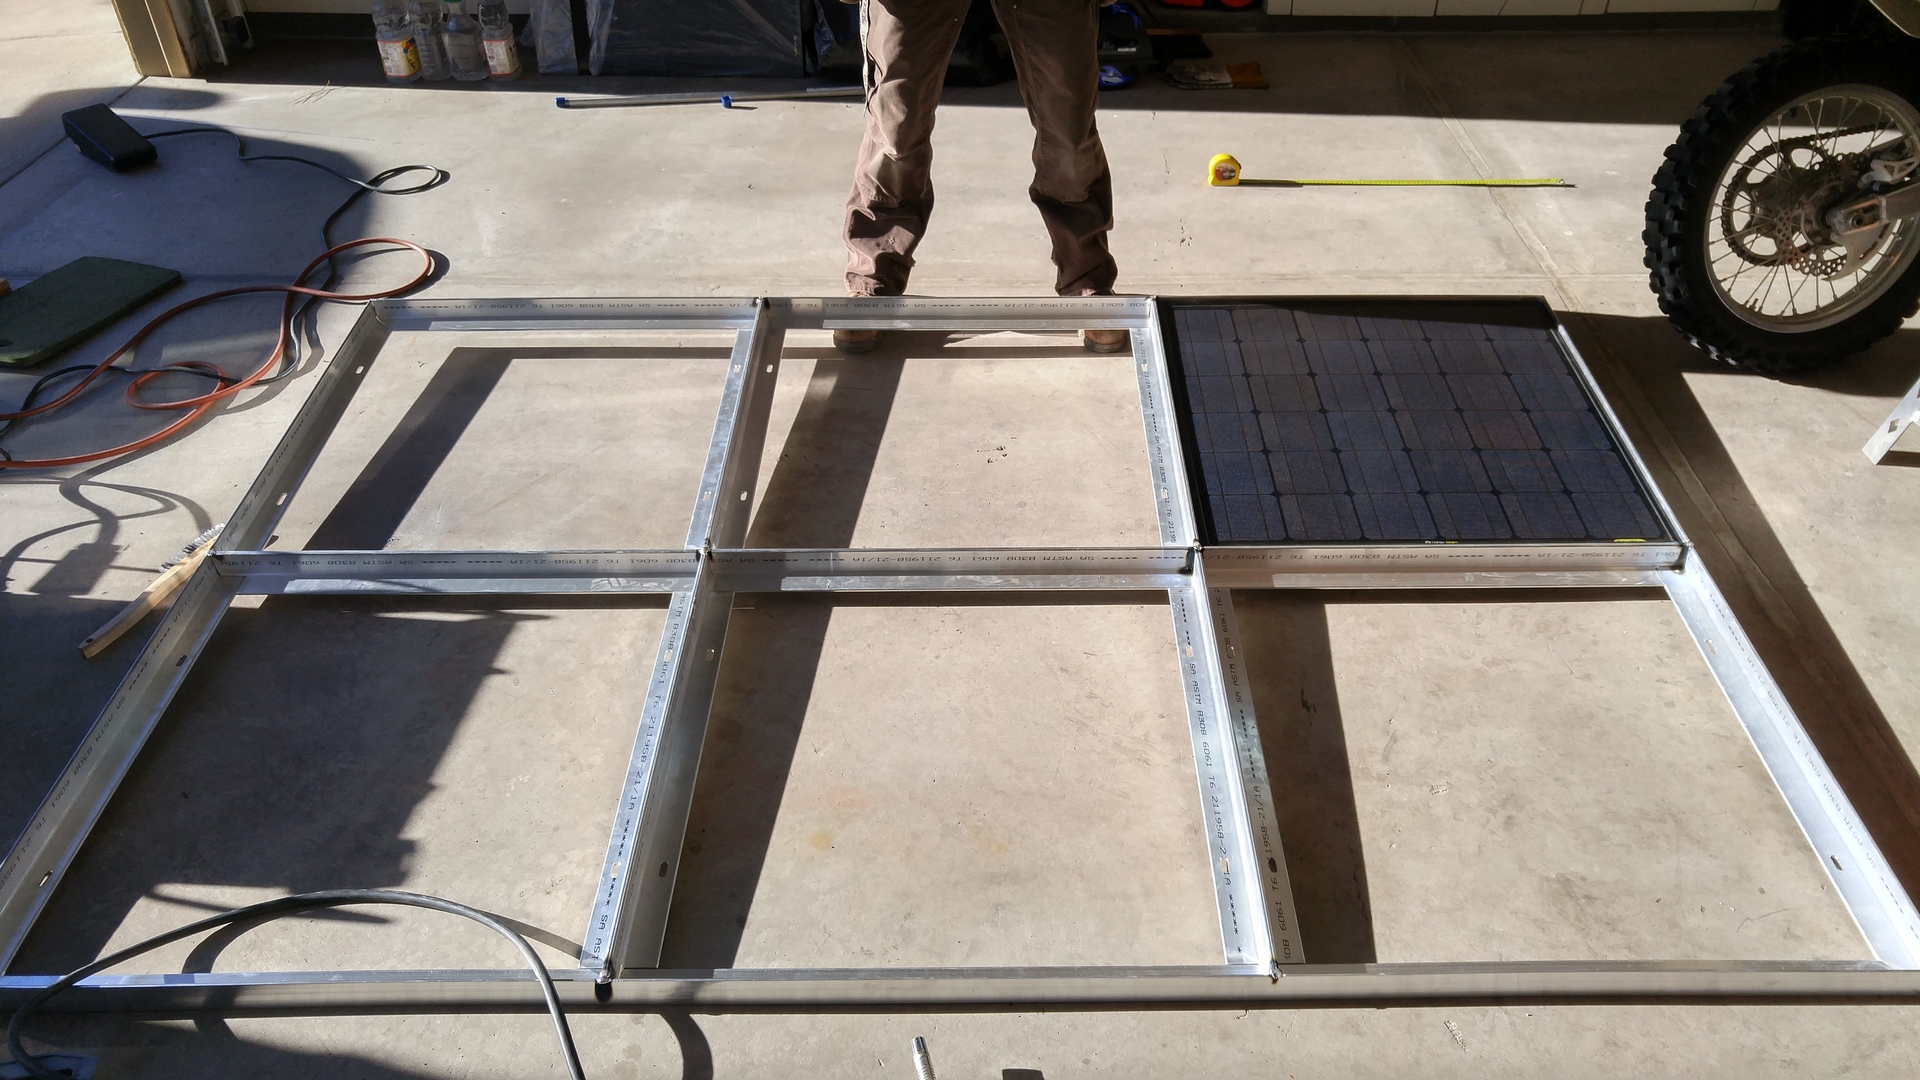 Checking the fit of a single Boulder 90 solar panel after tack-welding the frame.